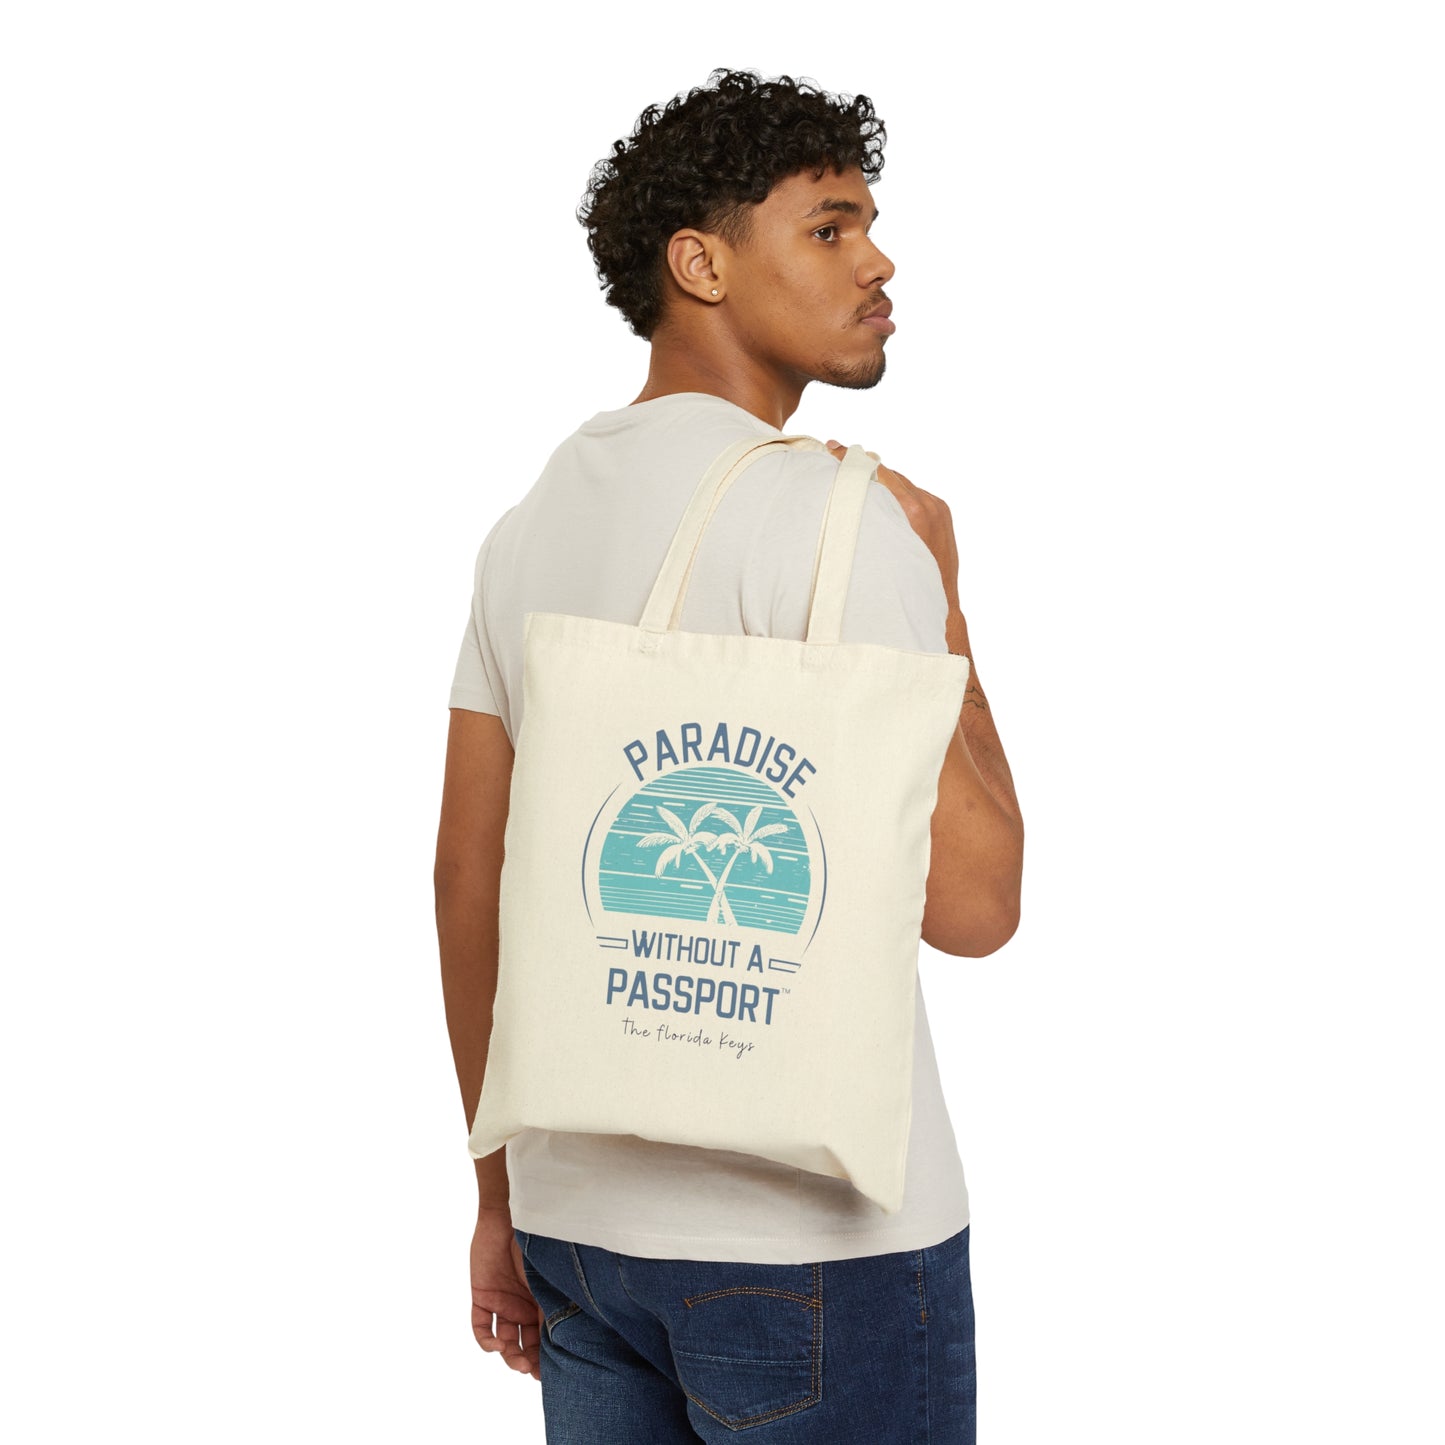 Paradise without a Passport Tote Bag - Beach tote florida keys - vintage style